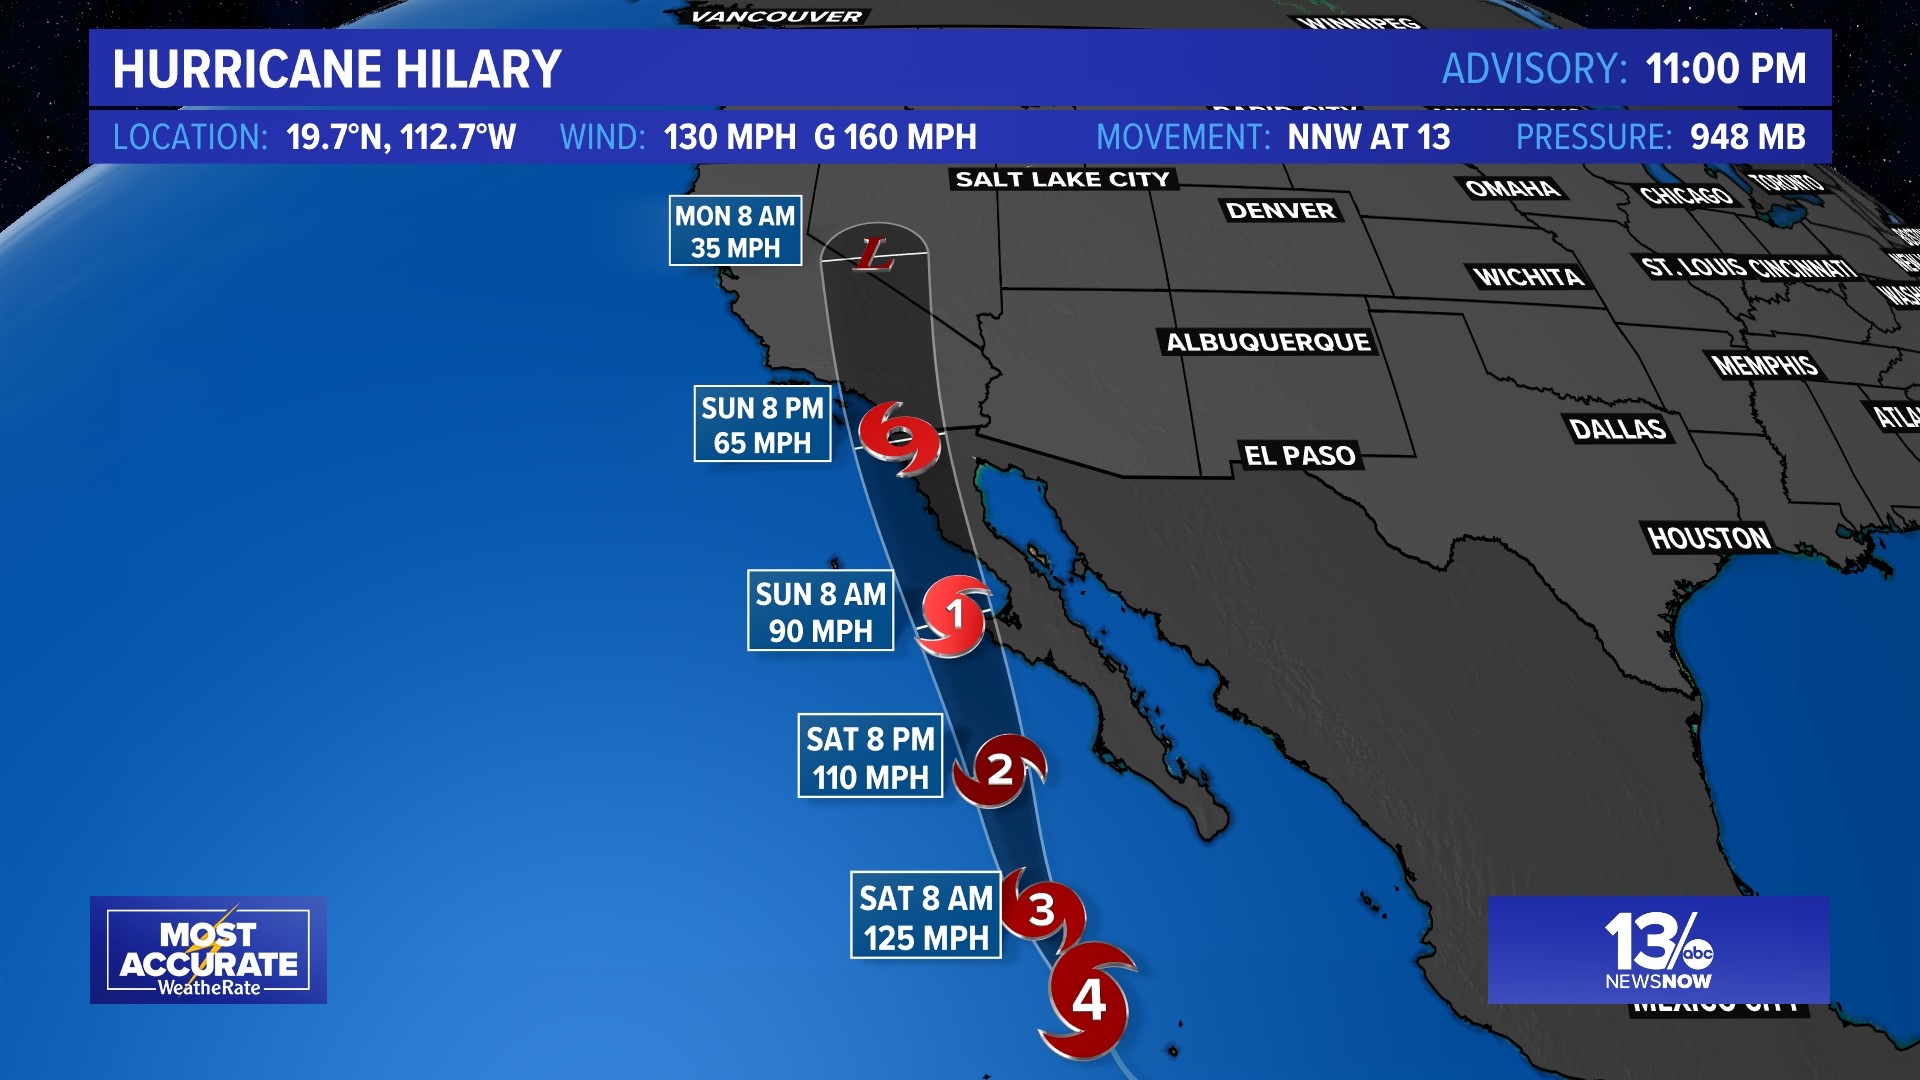 Hurricane Hilary has intensified into a major hurricane, threatening to bring wind and heavy tropical rain and potentially strong winds to parts of southwestern US.